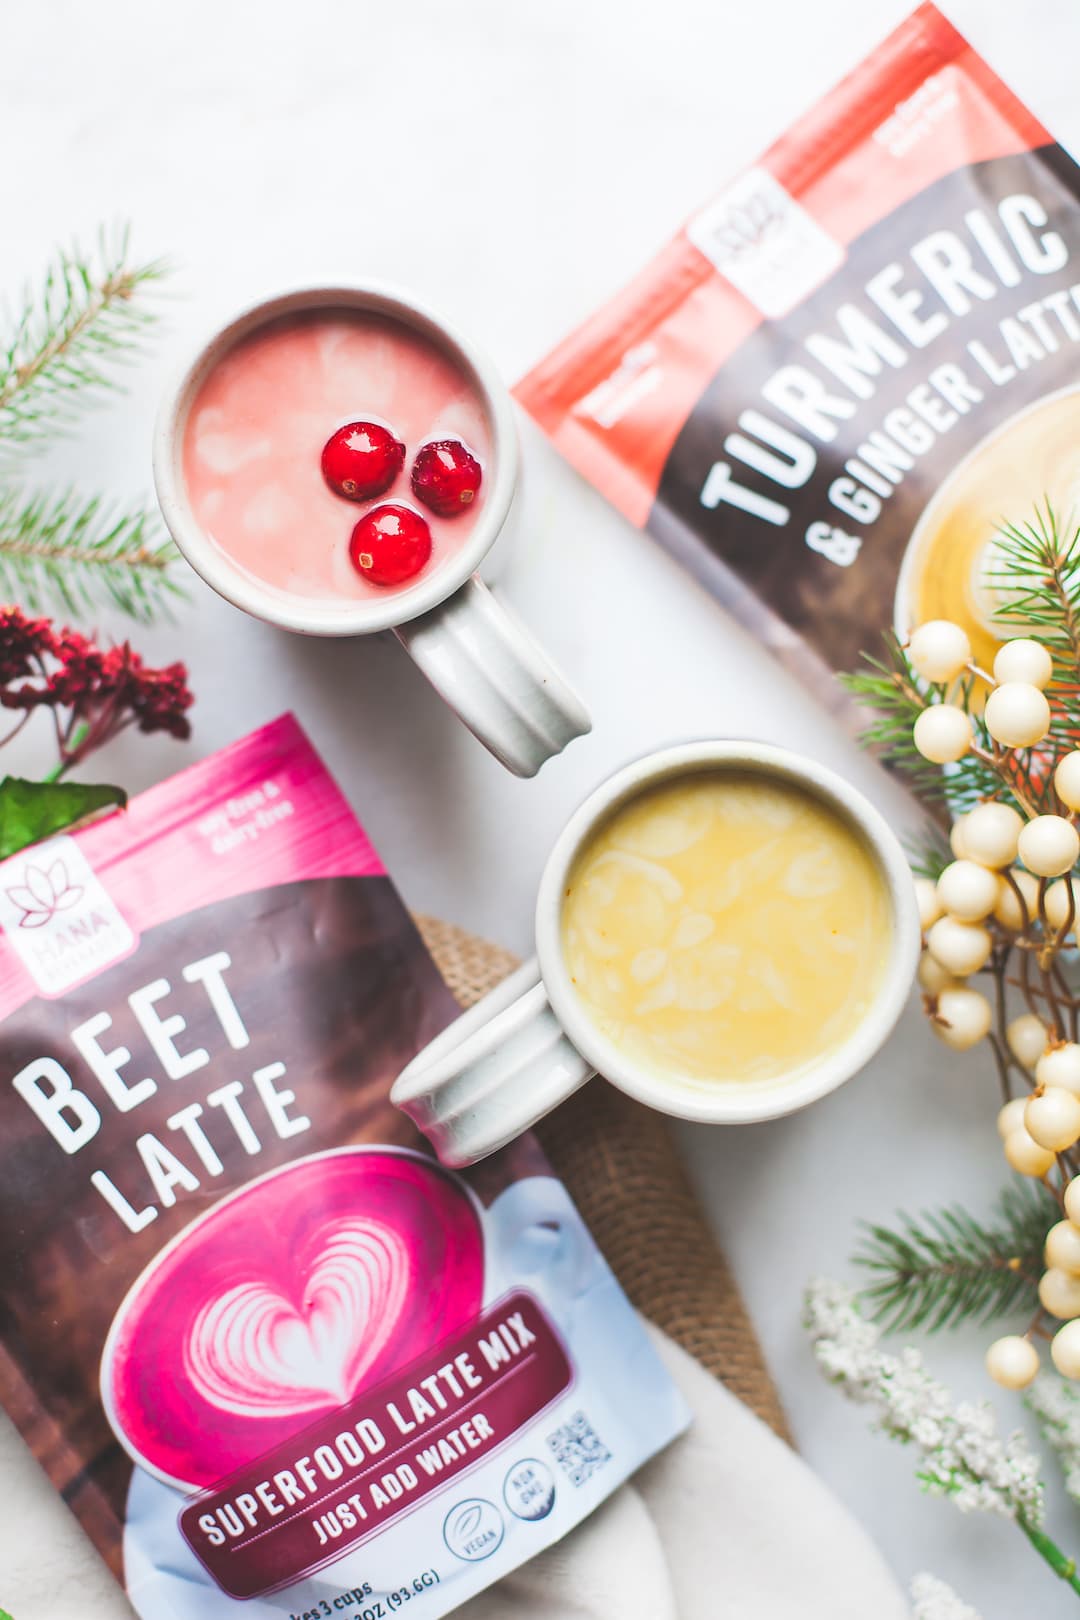 8 Self-Care Ideas For The Holiday Season - Enjoy a Latte or Healthy Hot Cocoa